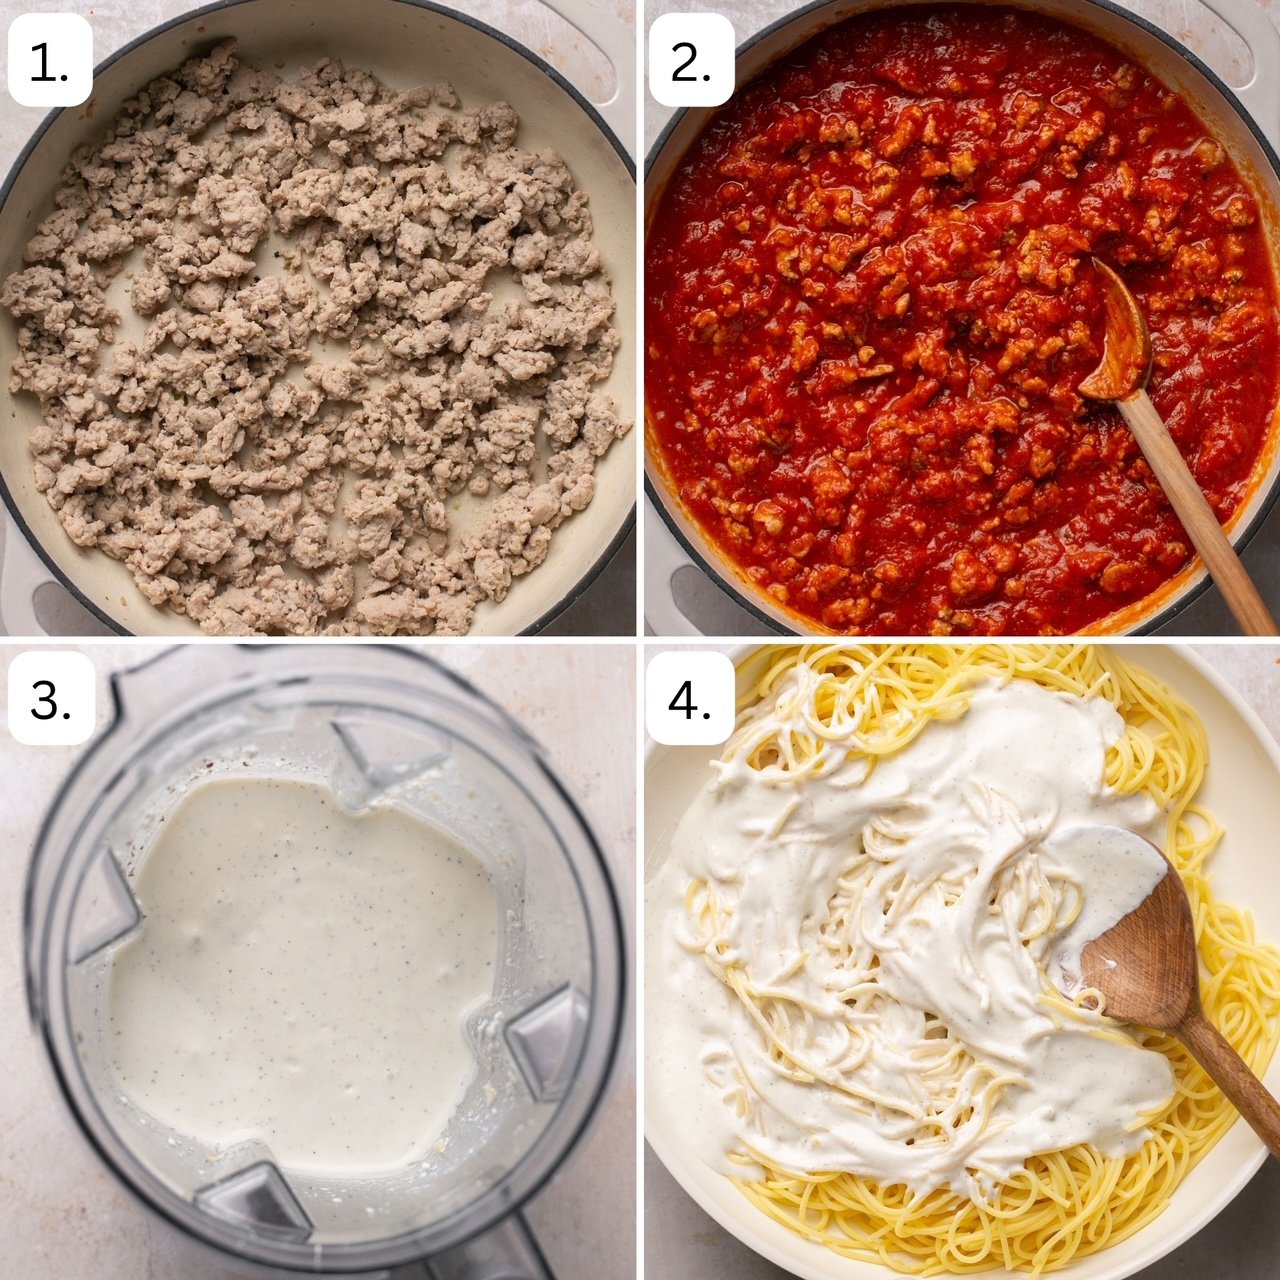 numbered step by step photos showing how to make the meat sauce and alfredo sauce. 